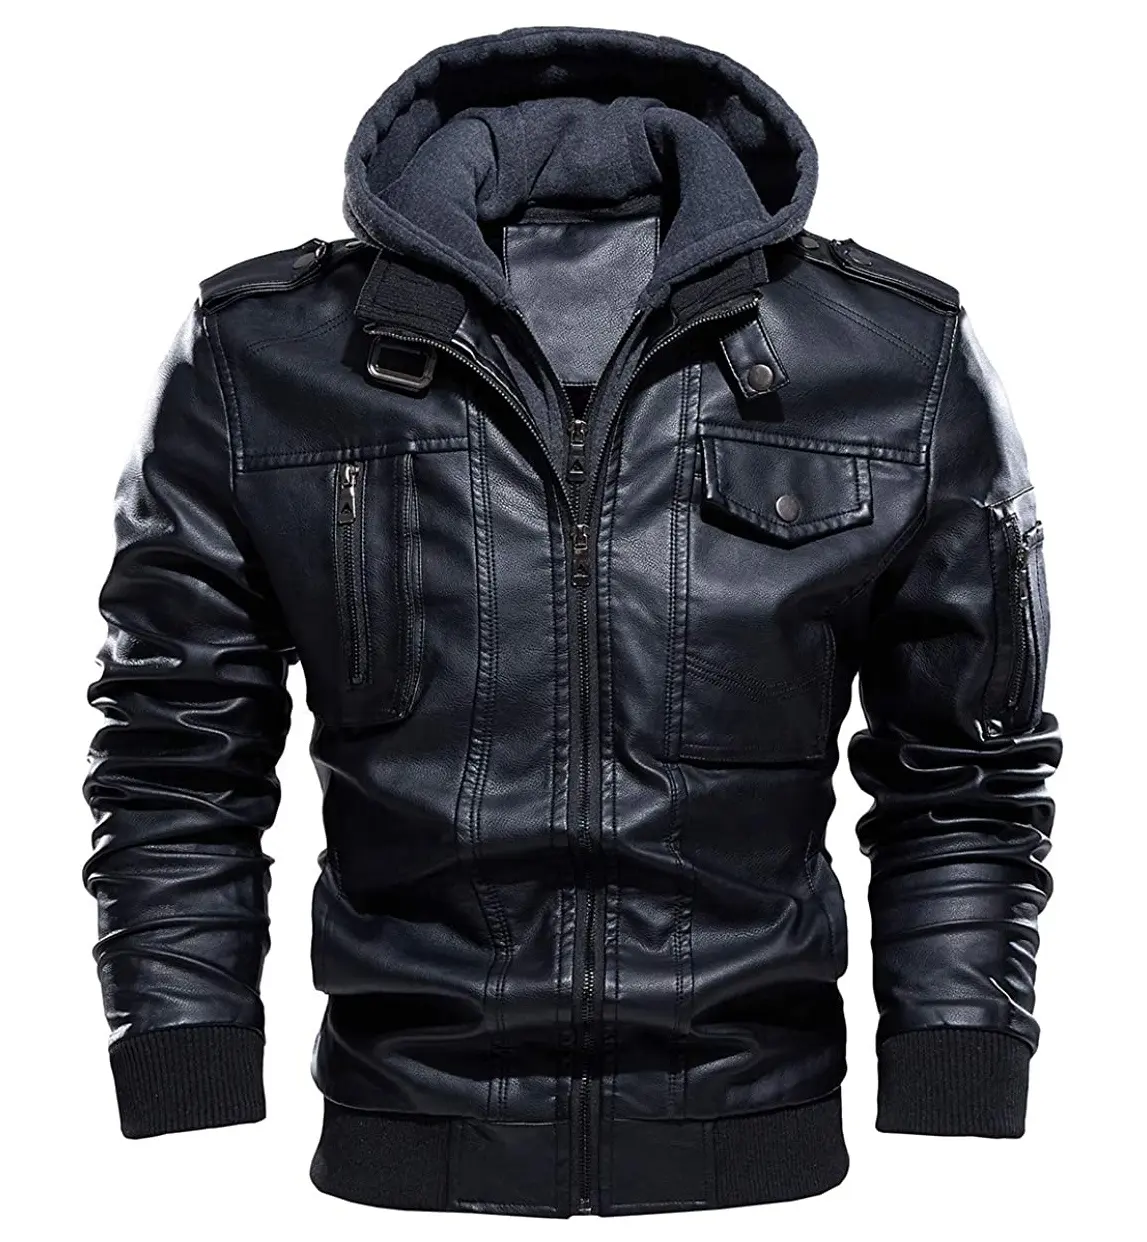 Mens Leather Jacket Winter Warm Fleece Lined Motorcycle Bomber Jackets with Removable Hood